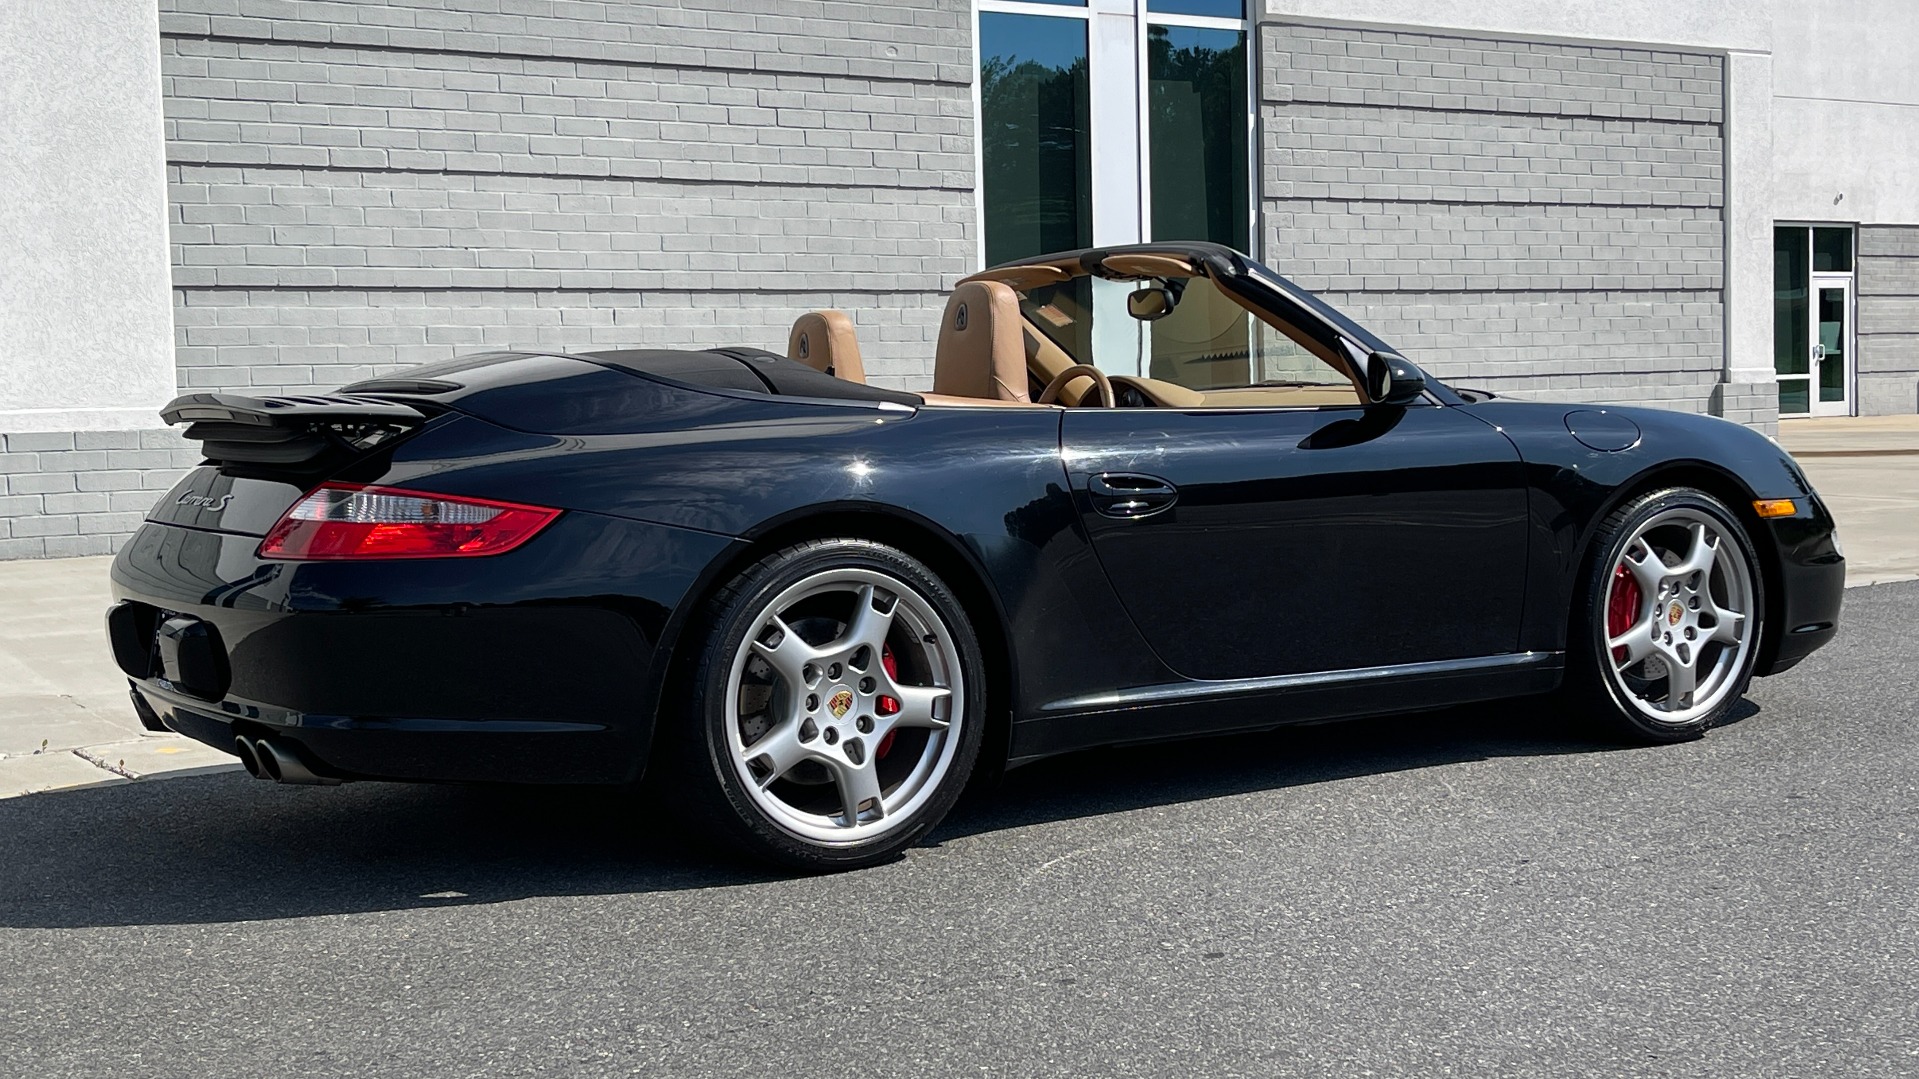 Used 2006 Porsche 911 CARRERA S CABRIOLET / BOSE / CD CHANGER / PWR SEAT PKG / HTD STS for sale $56,400 at Formula Imports in Charlotte NC 28227 4